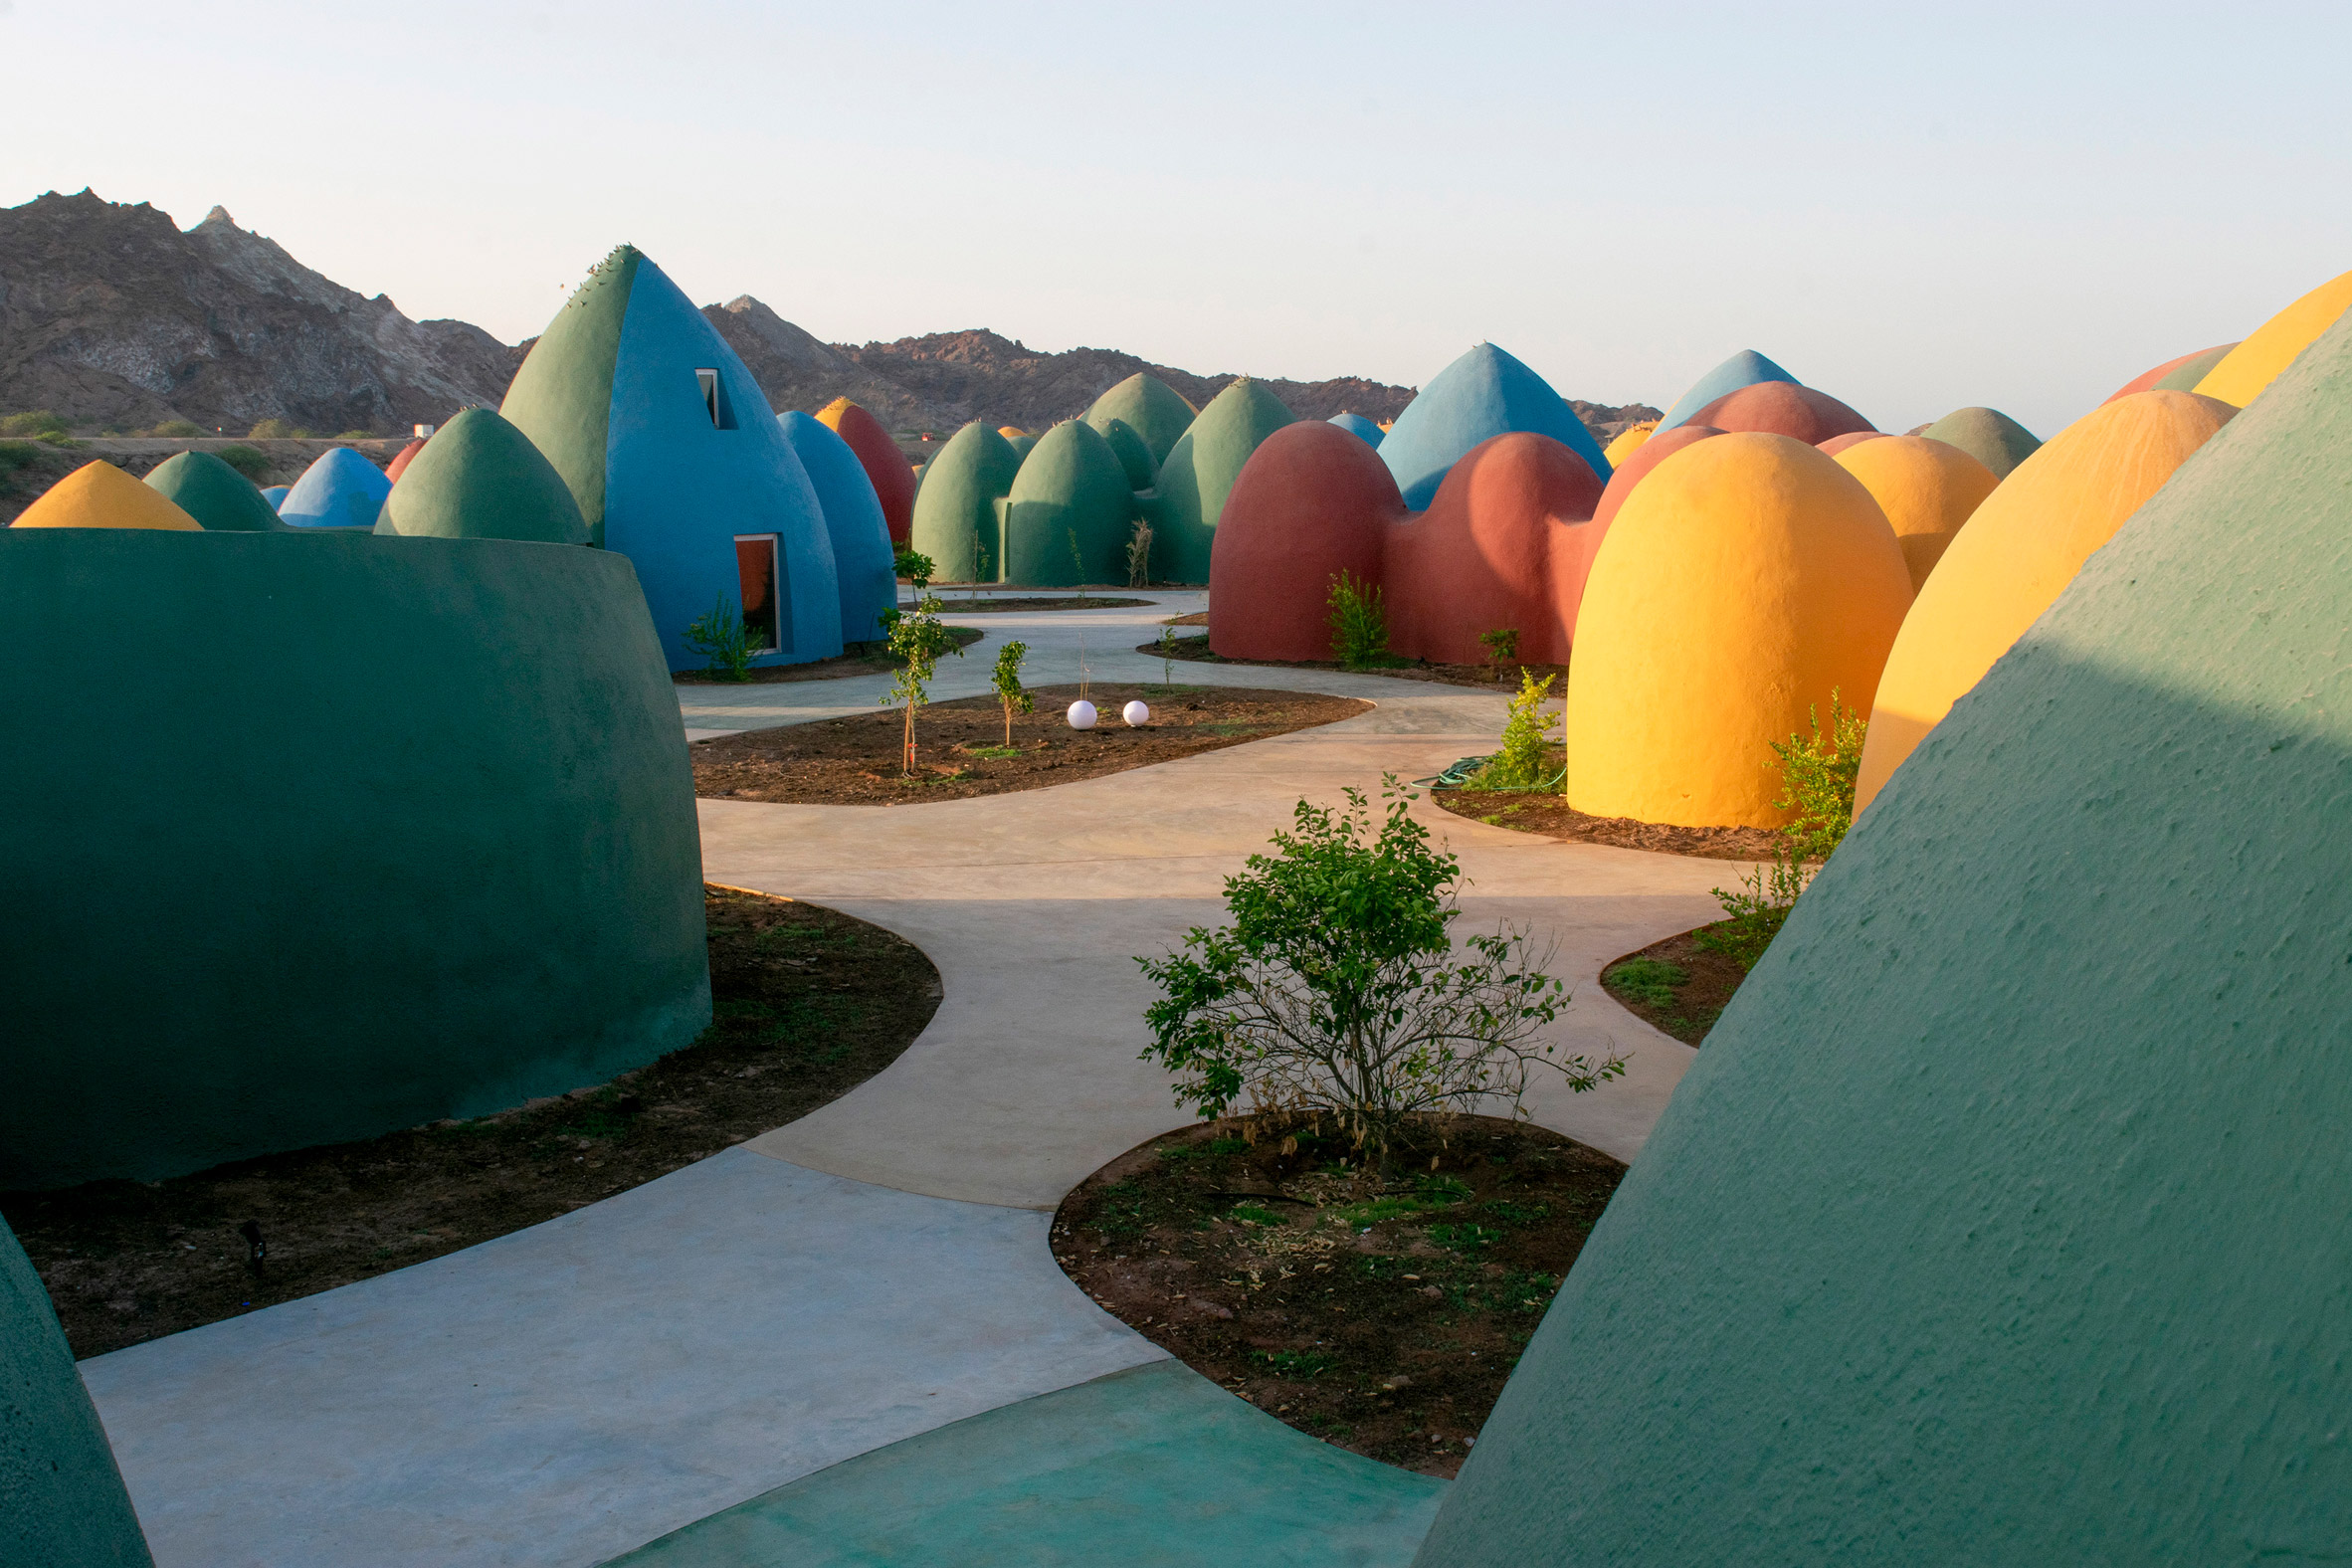 Brightly coloured domed holiday homes